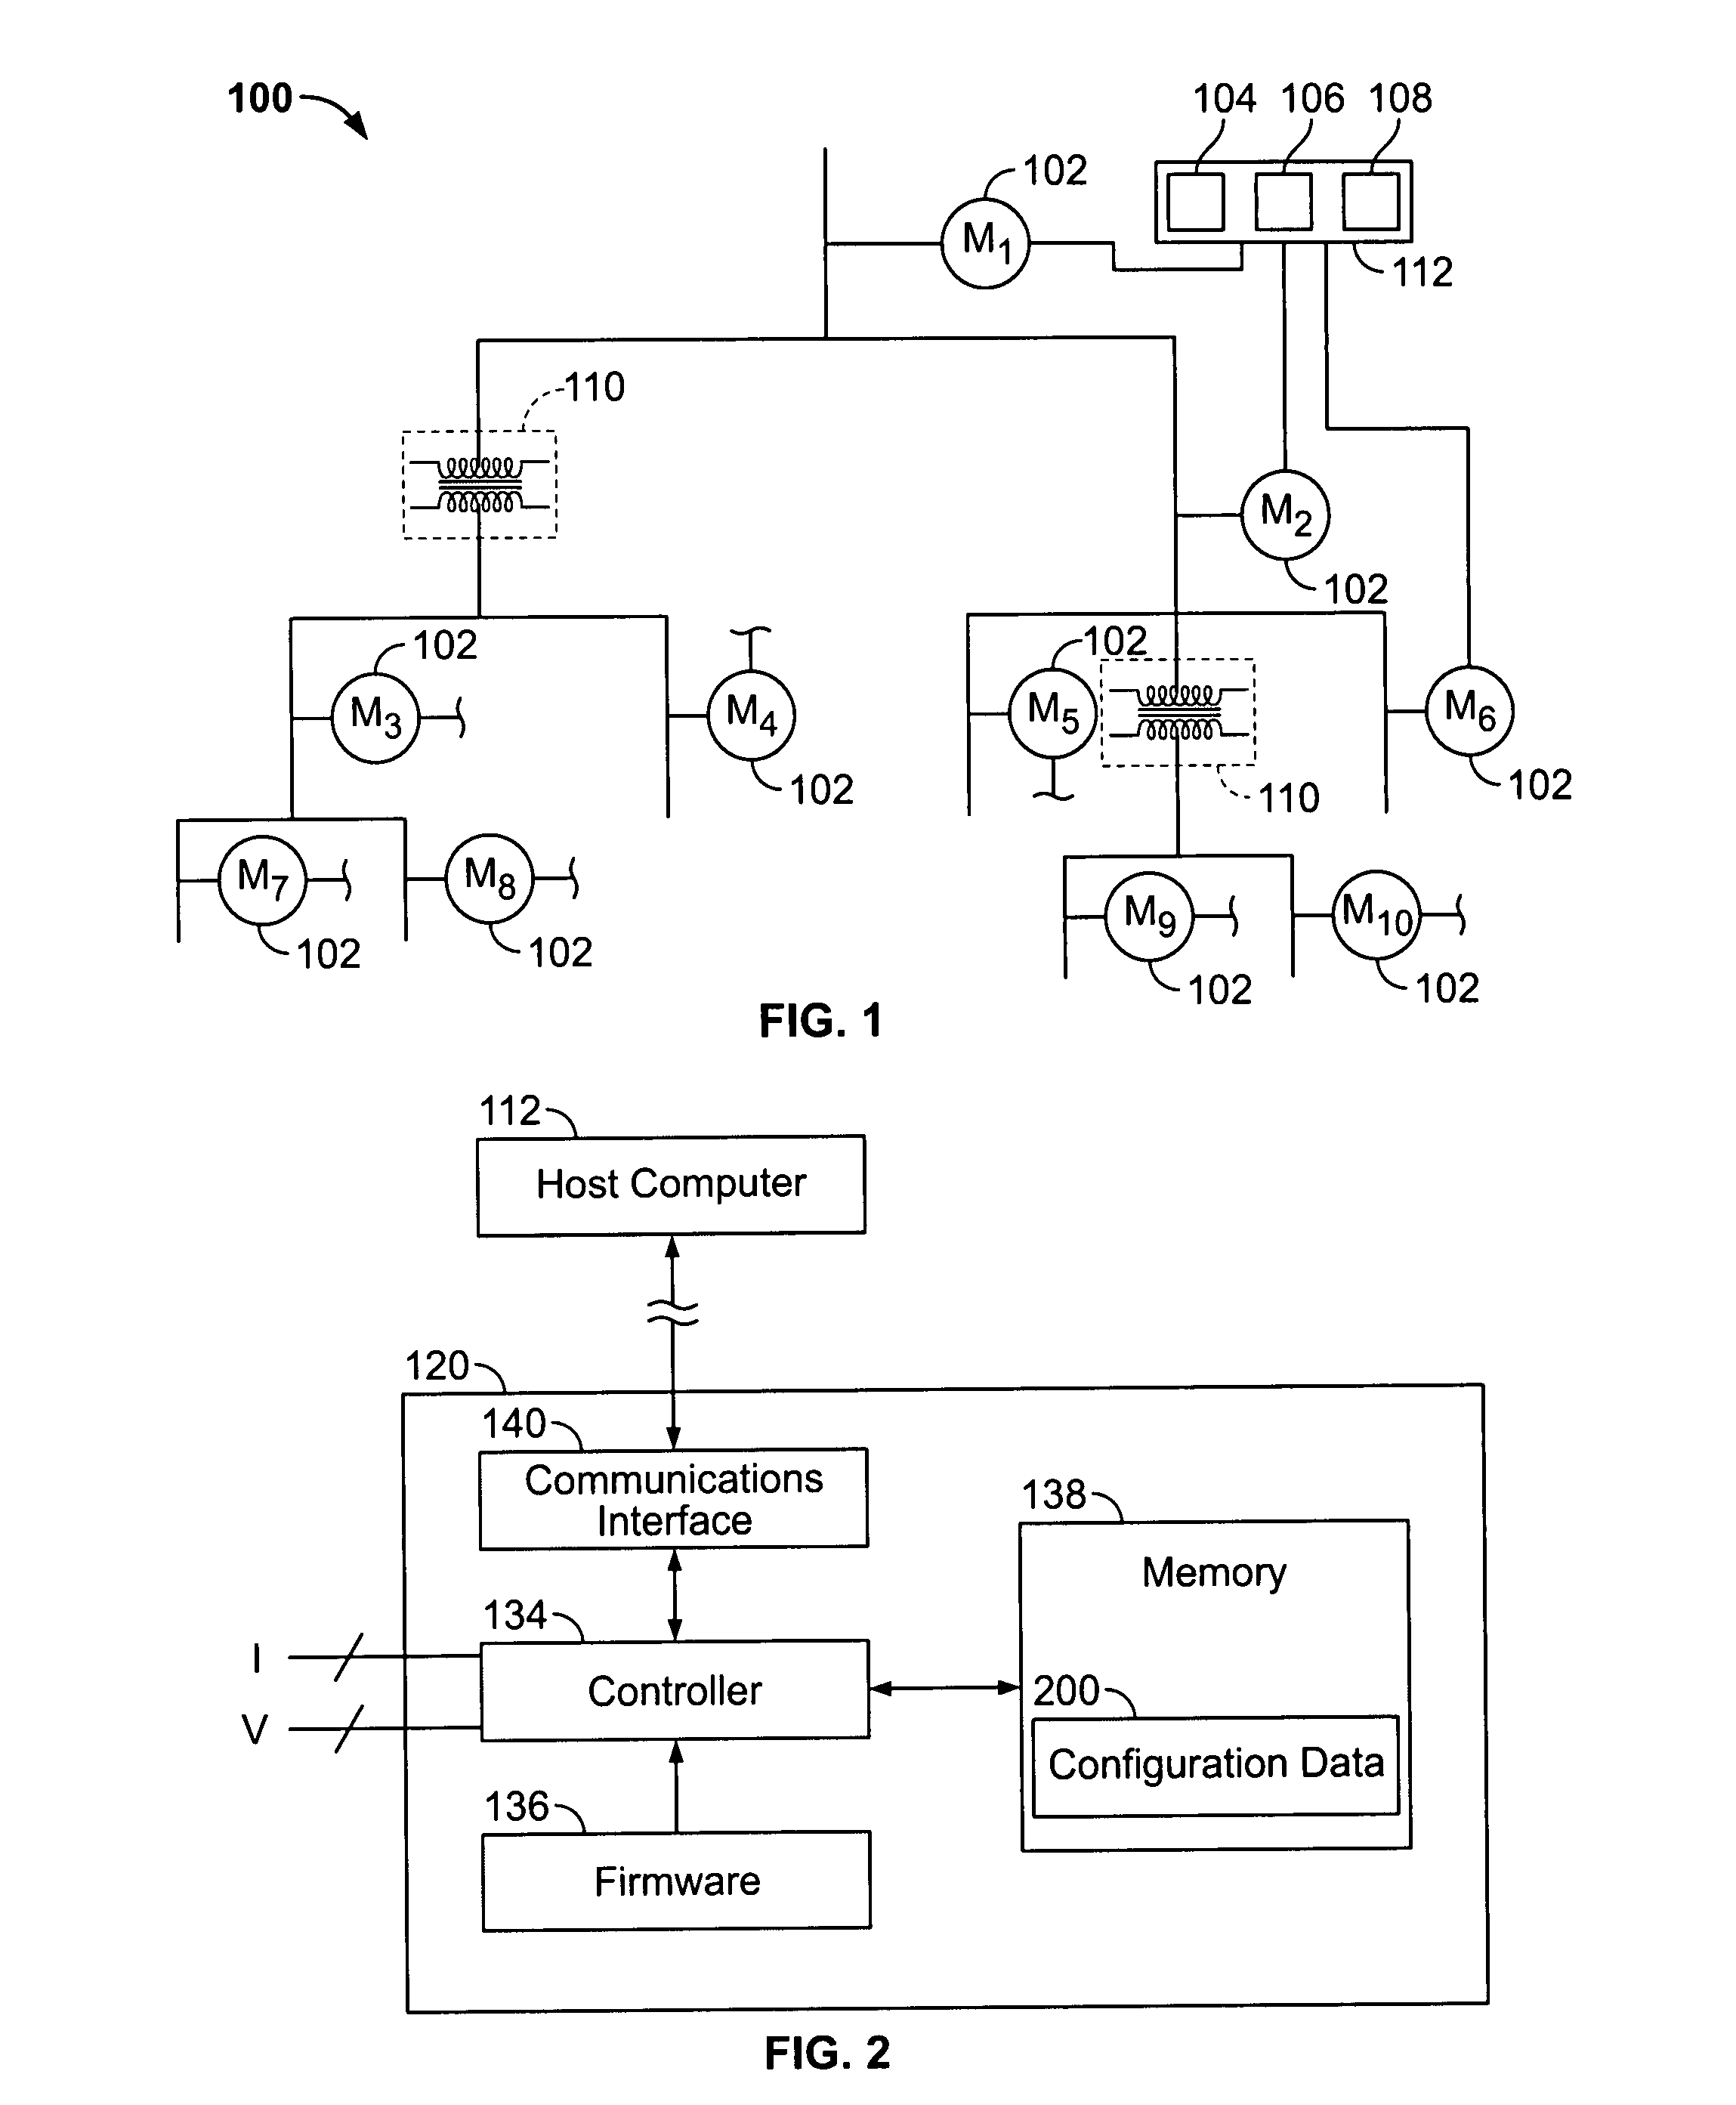 Automated configuration of a power monitoring system using hierarchical context